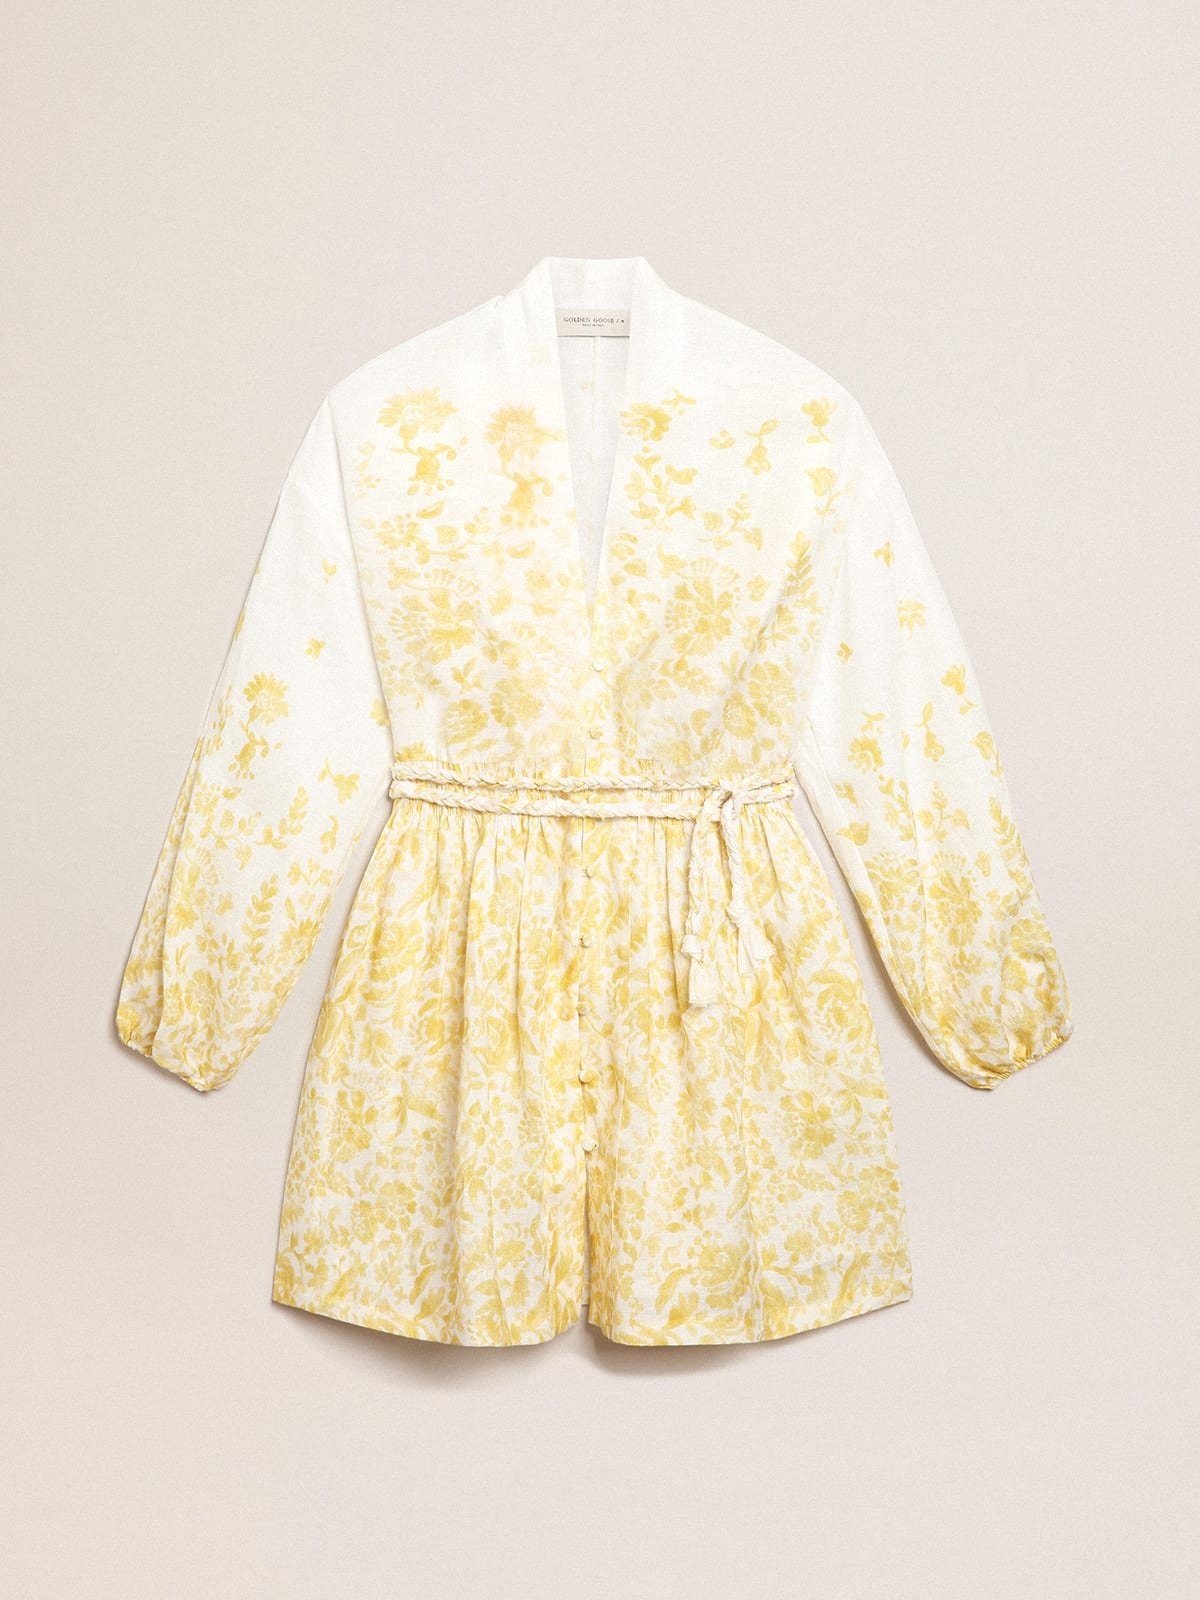 Resort Collection Mini Dress in linen with lemon yellow print - 1